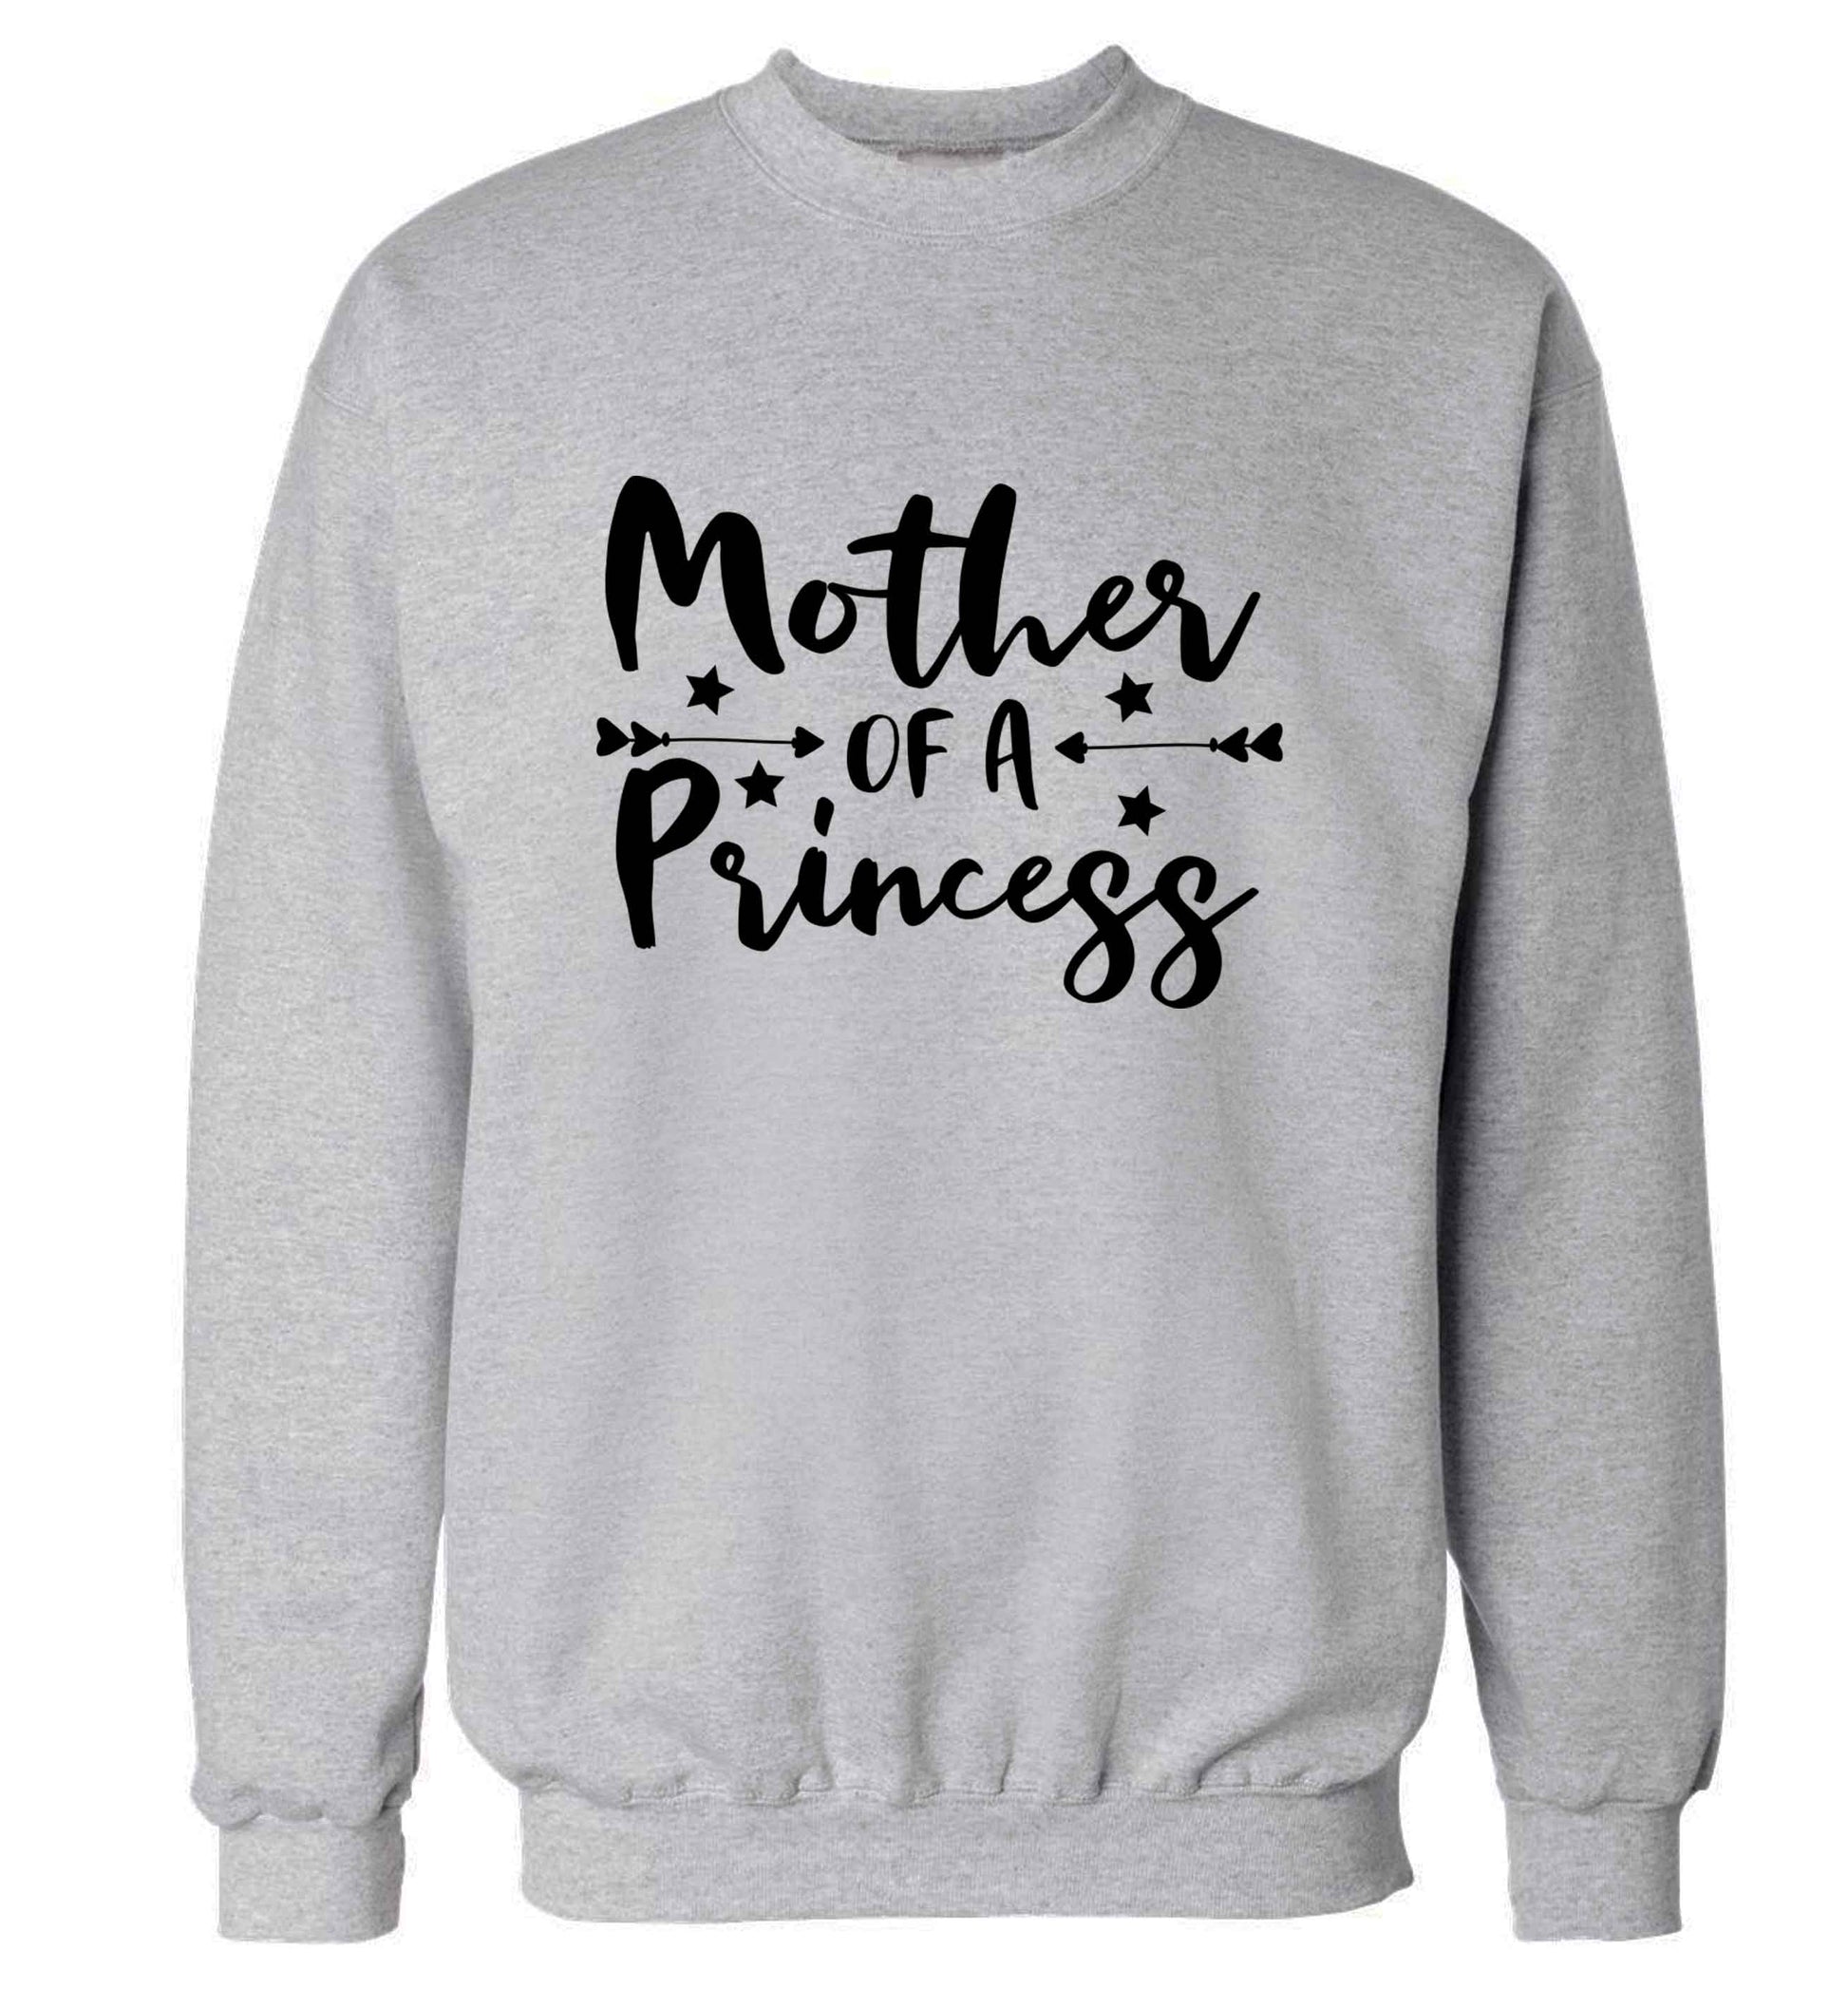 Mother of a princess adult's unisex grey sweater 2XL